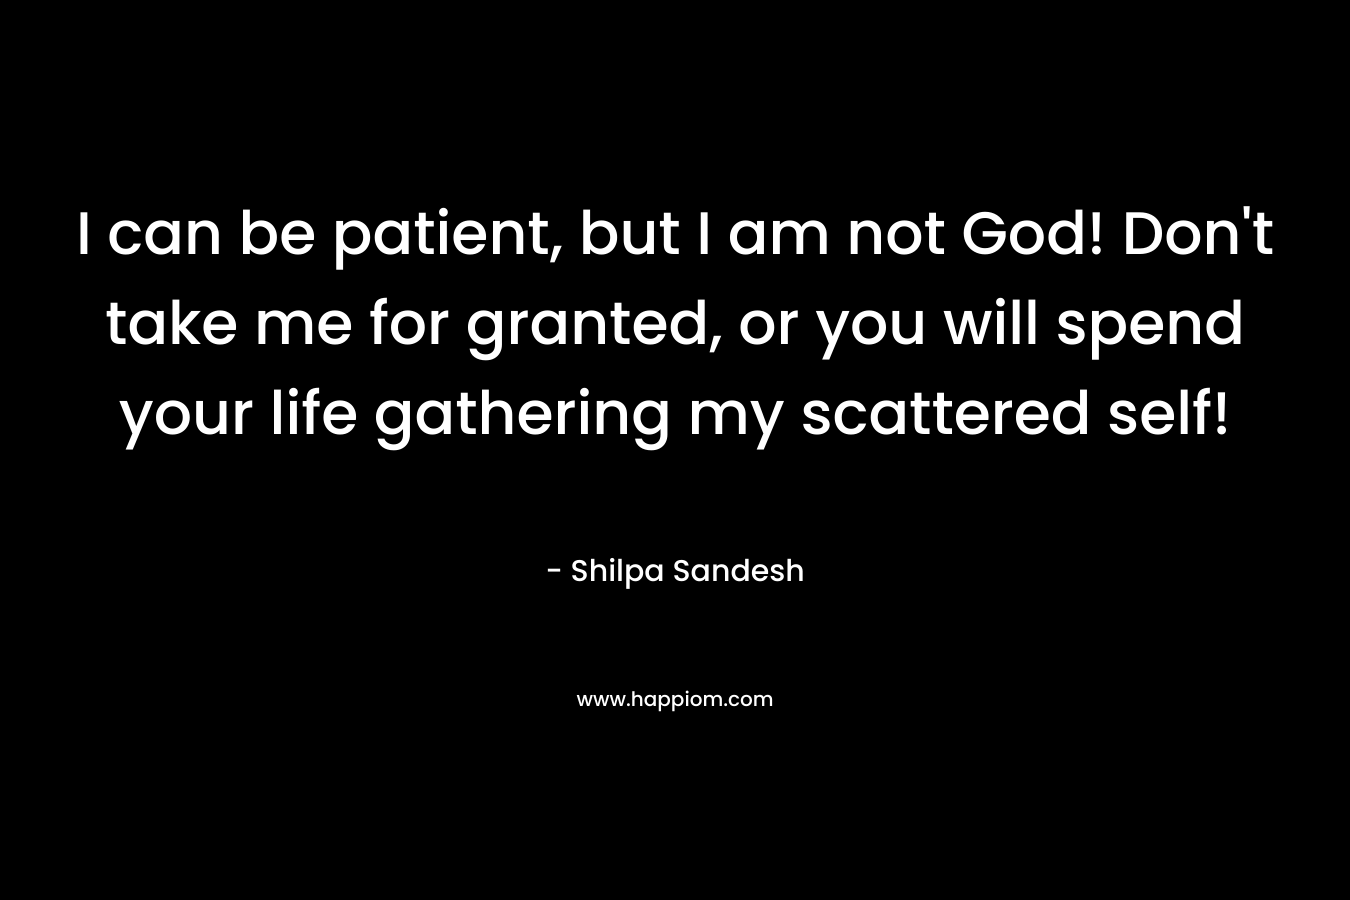 I can be patient, but I am not God! Don’t take me for granted, or you will spend your life gathering my scattered self! – Shilpa Sandesh